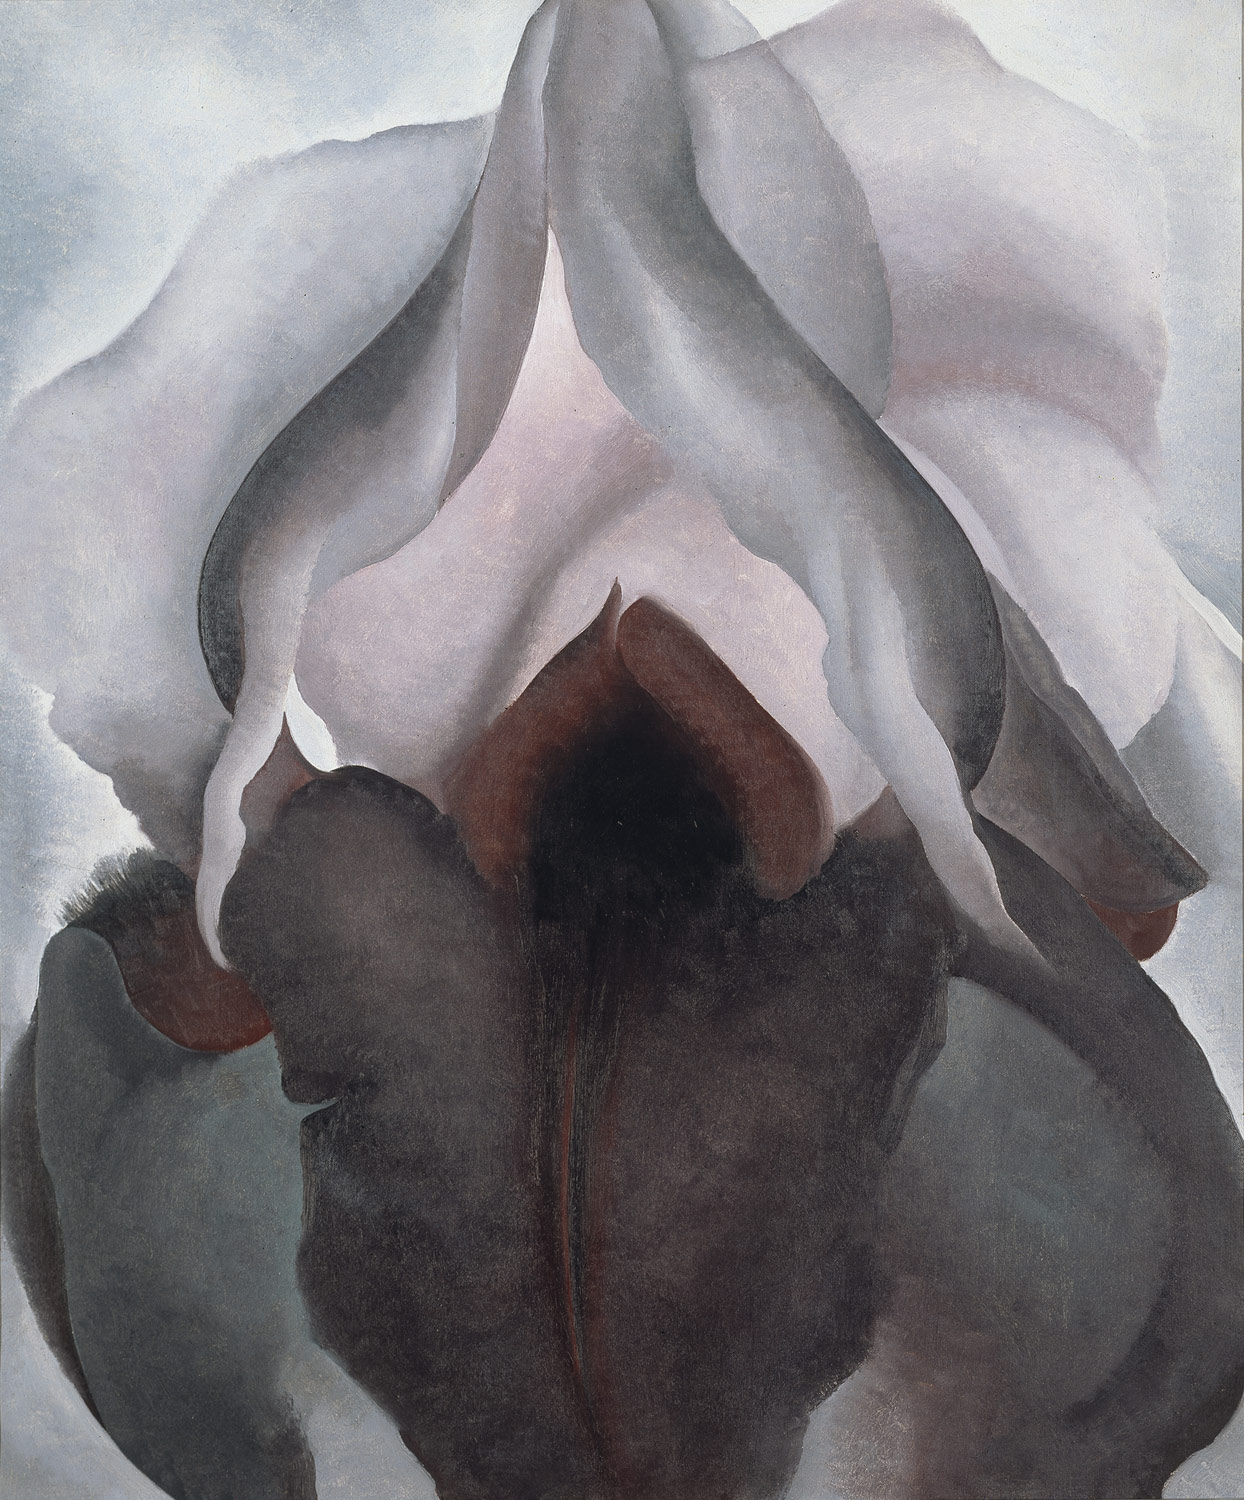 1926 oil painting by Georgia O'Keefe: an extreme close up of the flower with white petals at the top and black-purple flowers at the bottom; the centre of the flower looks like a deep black hole.